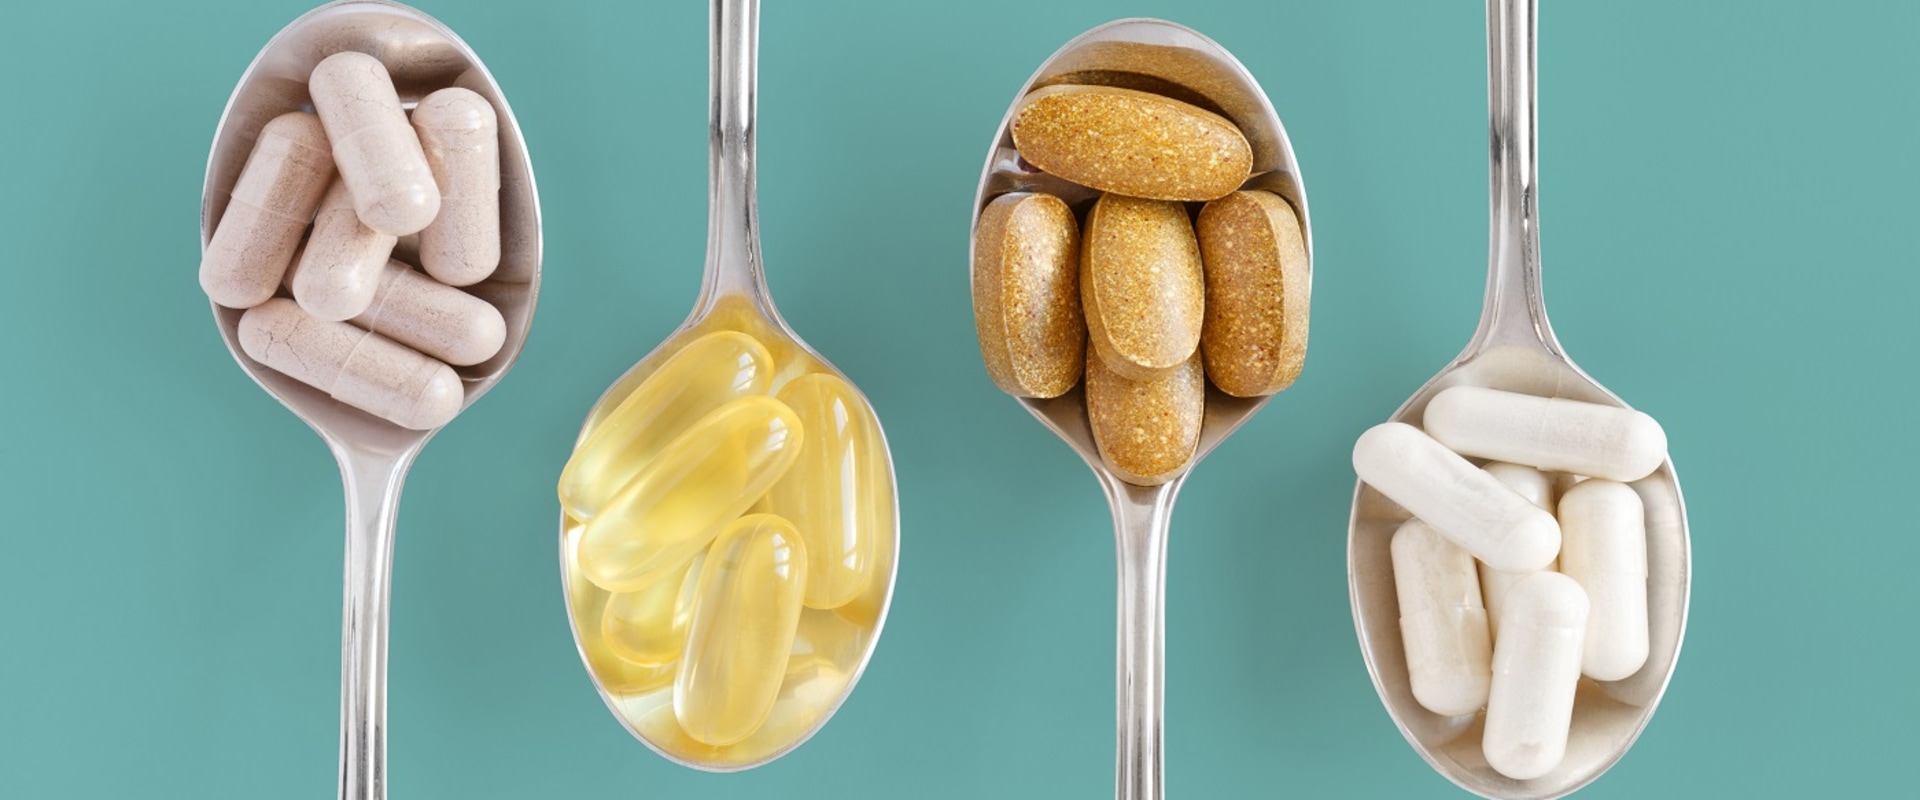 What Foods and Beverages Should You Avoid When Taking Vitamins?